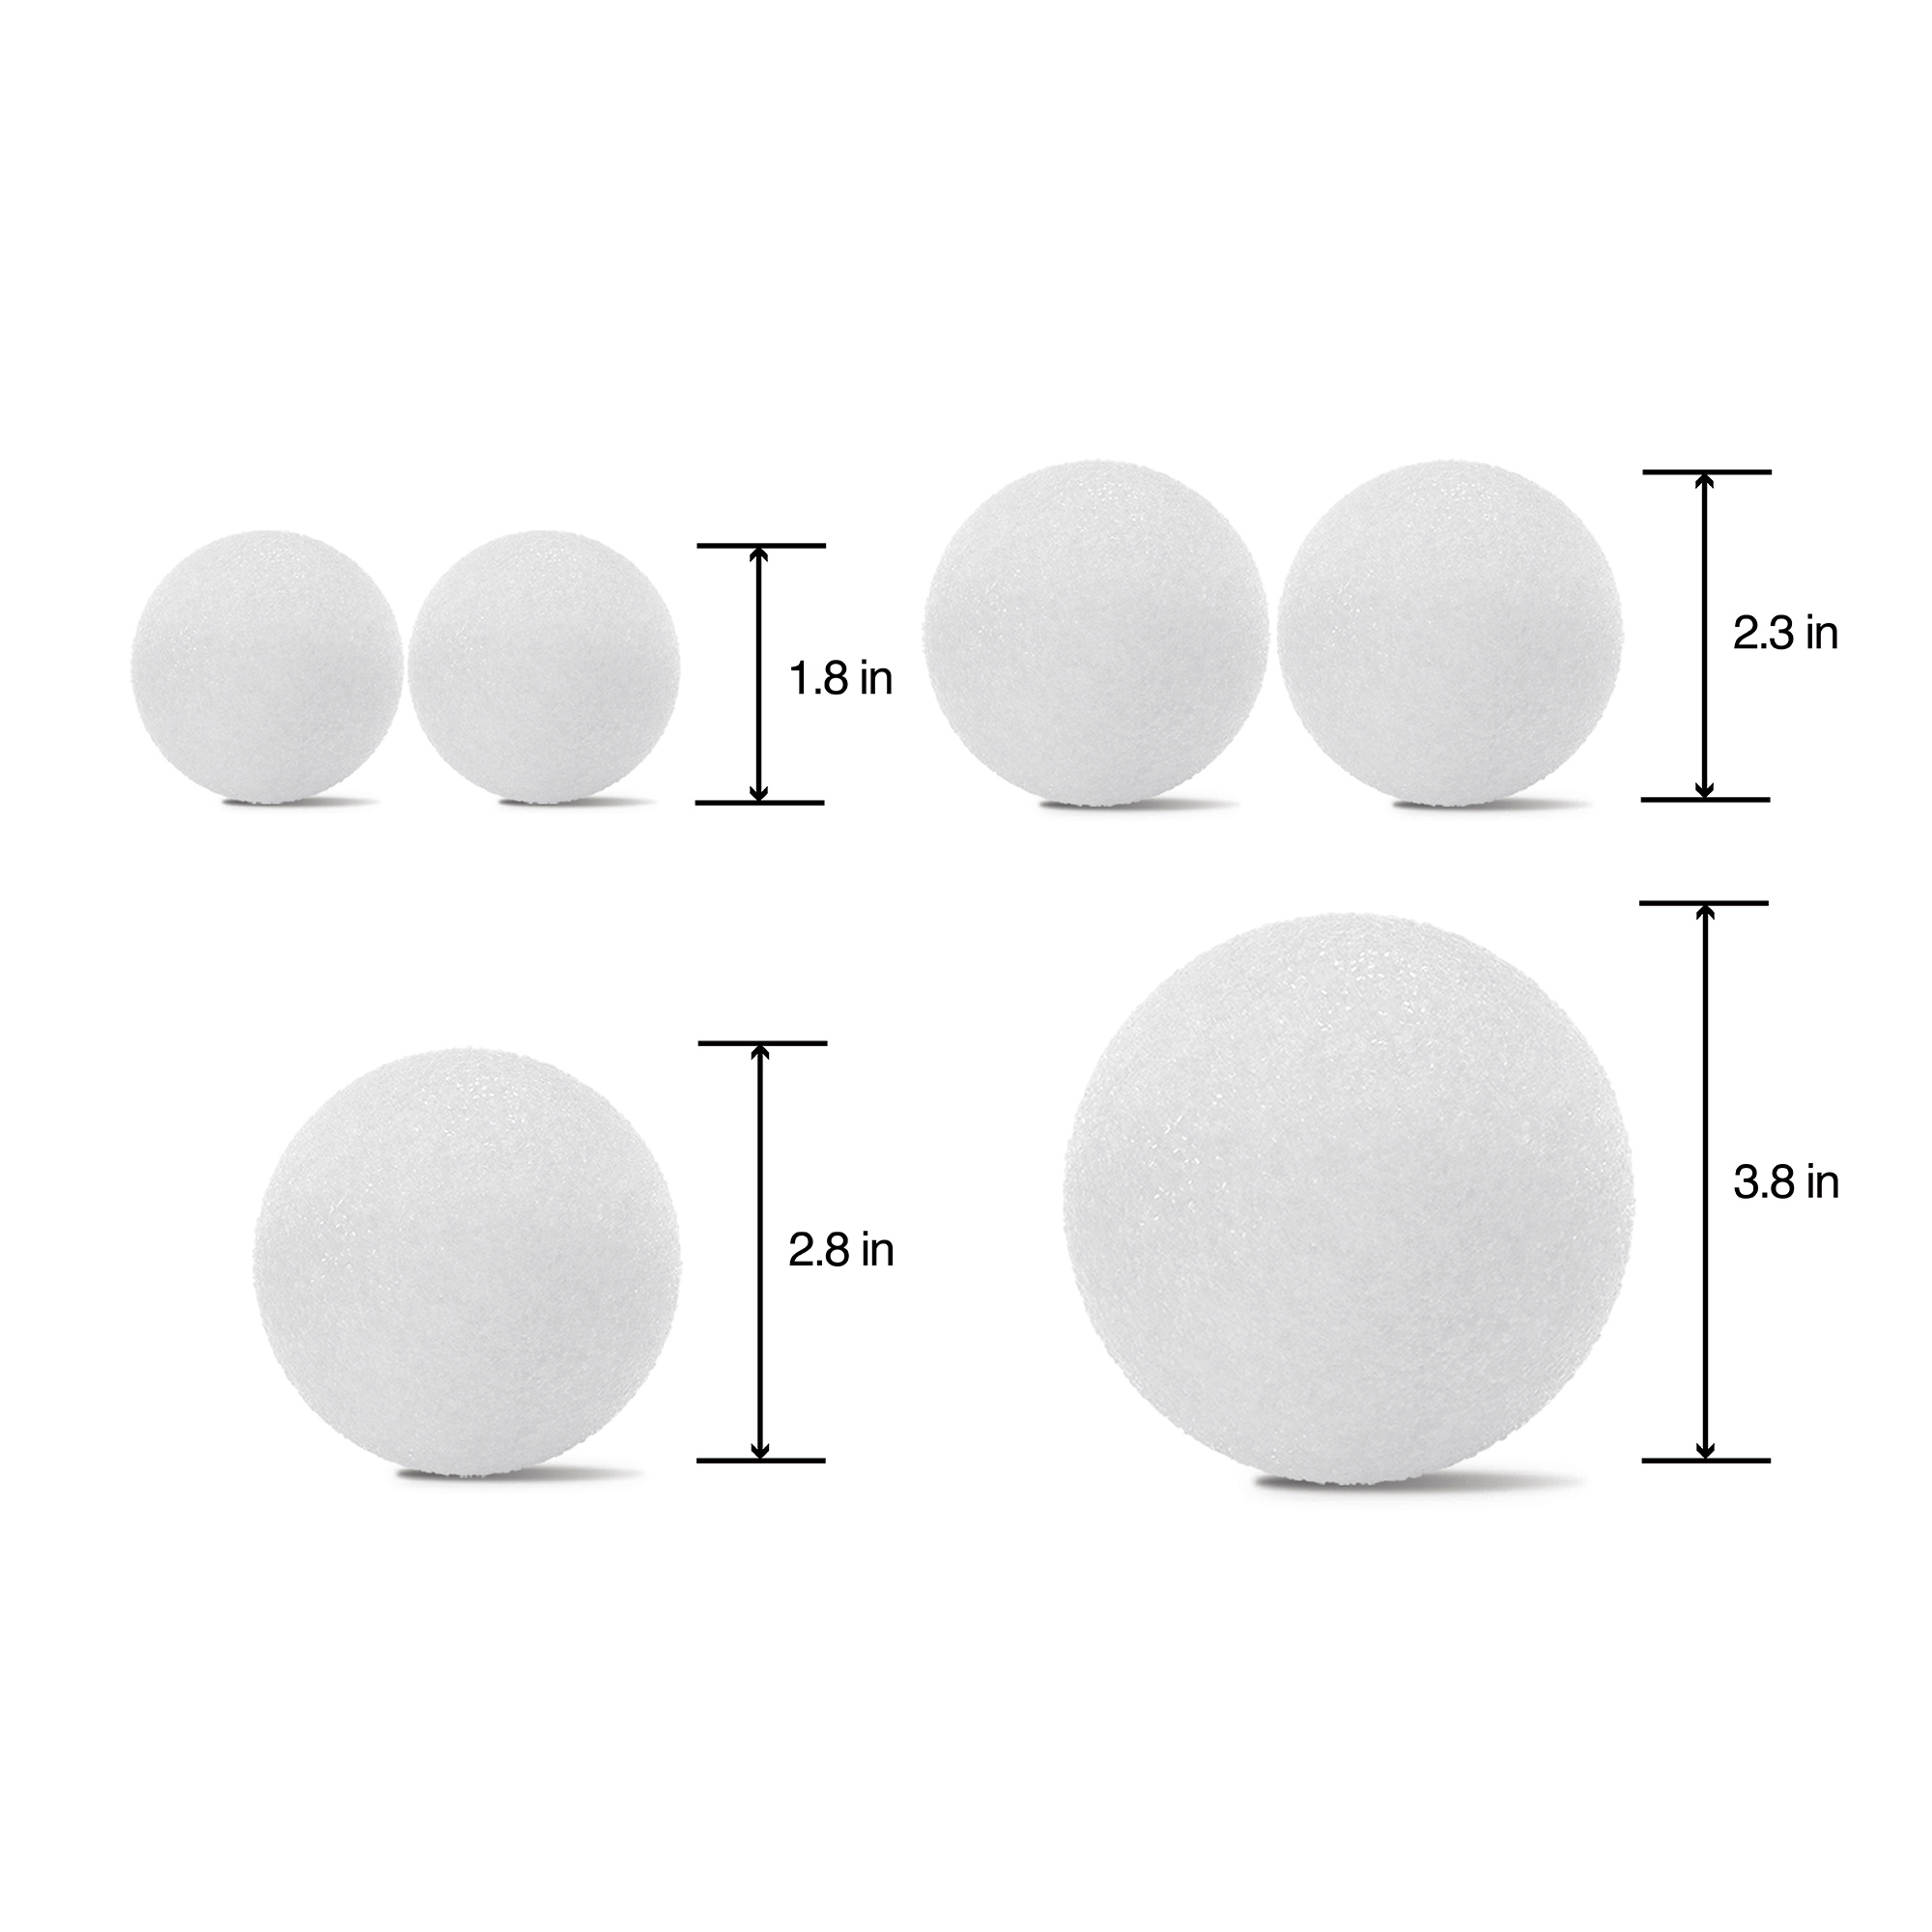 FloraCraft CraftFōM 6 piece Crafting Foam Ball Assorted Sizes White – 2 piece 1.8 inch, 2 piece 2.3 inch, 1 piece 2.8 inch and 1 piece 3.8 inch - image 3 of 7